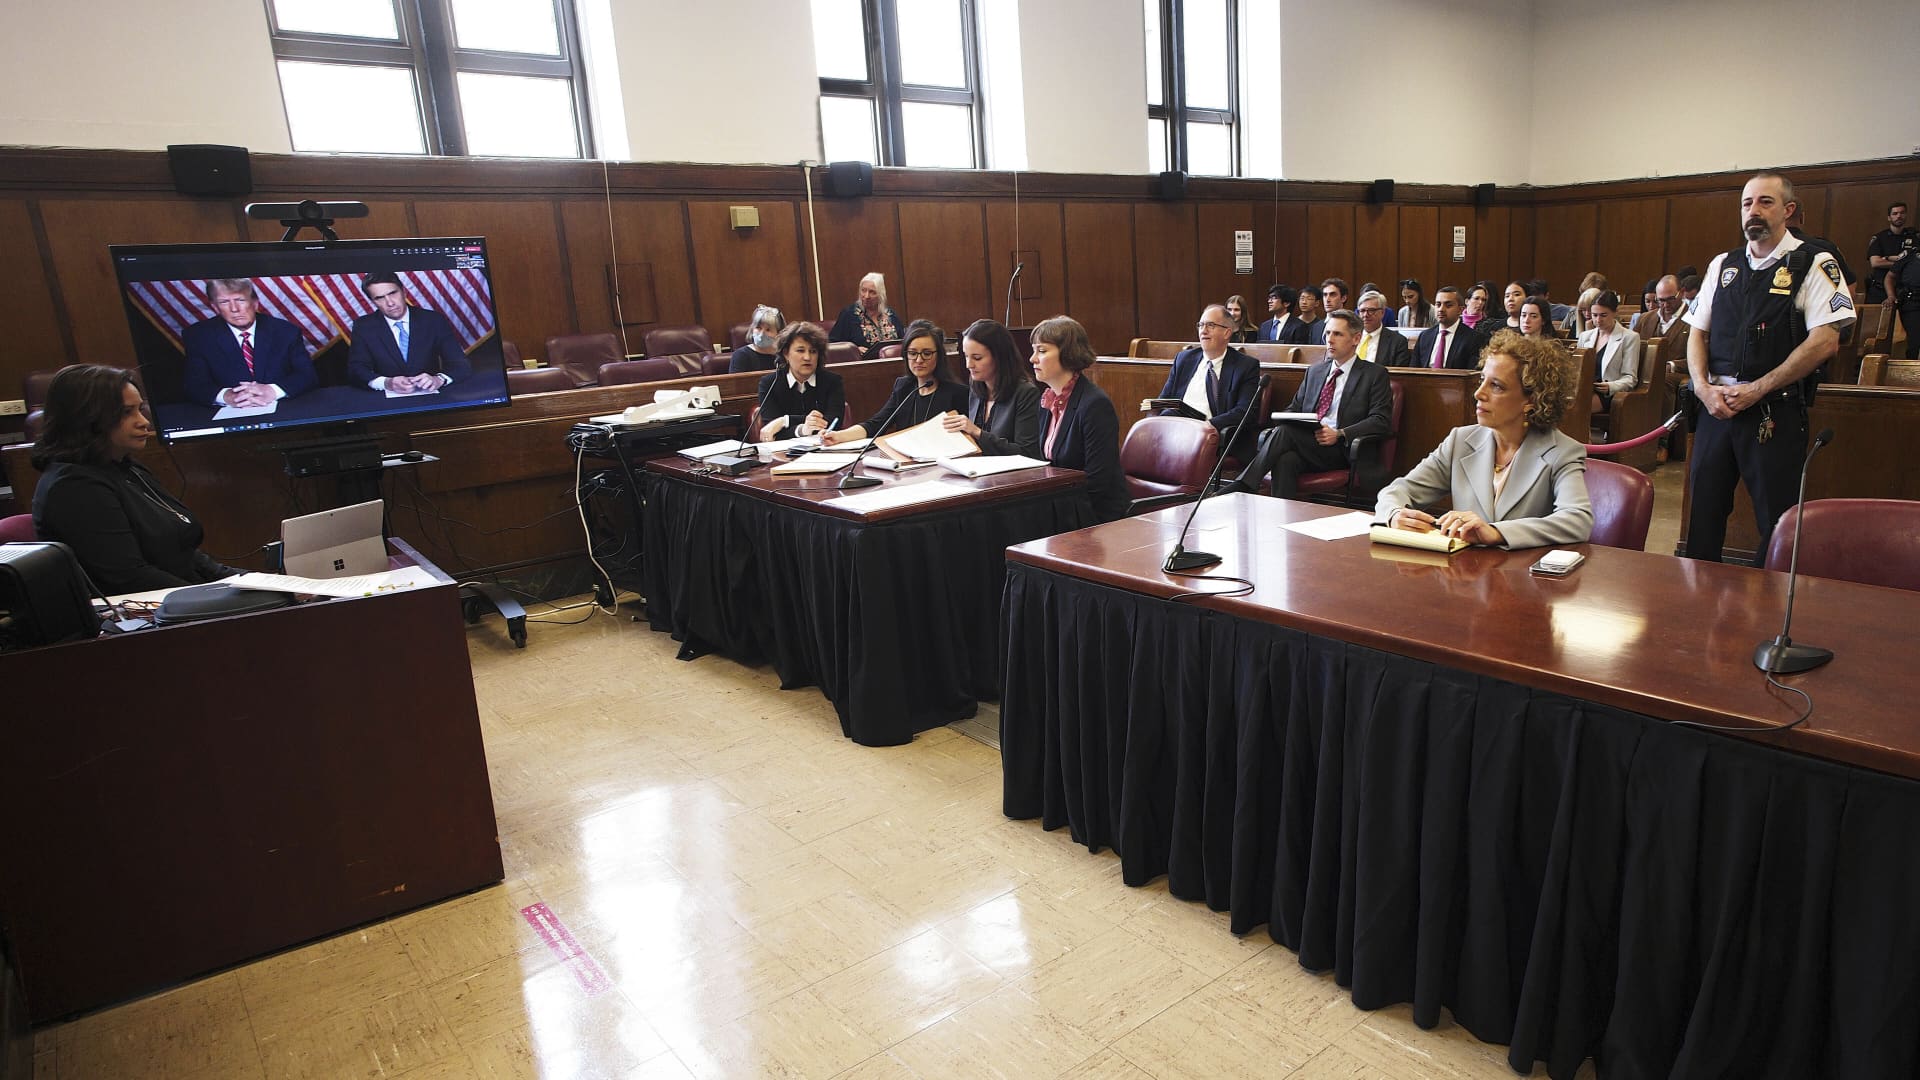 Former president Donald Trump, left on screen, and his attorney, Todd Blanche, right on screen, appear by video, as his other attorney Susan Necheles, right, looks on, before a hearing begins in Manhattan criminal court, in New York, Tuesday, May 23, 2023. Trump made a video appearance Tuesday in his New York criminal case, with the judge tentatively setting a trial date for late March of next year.